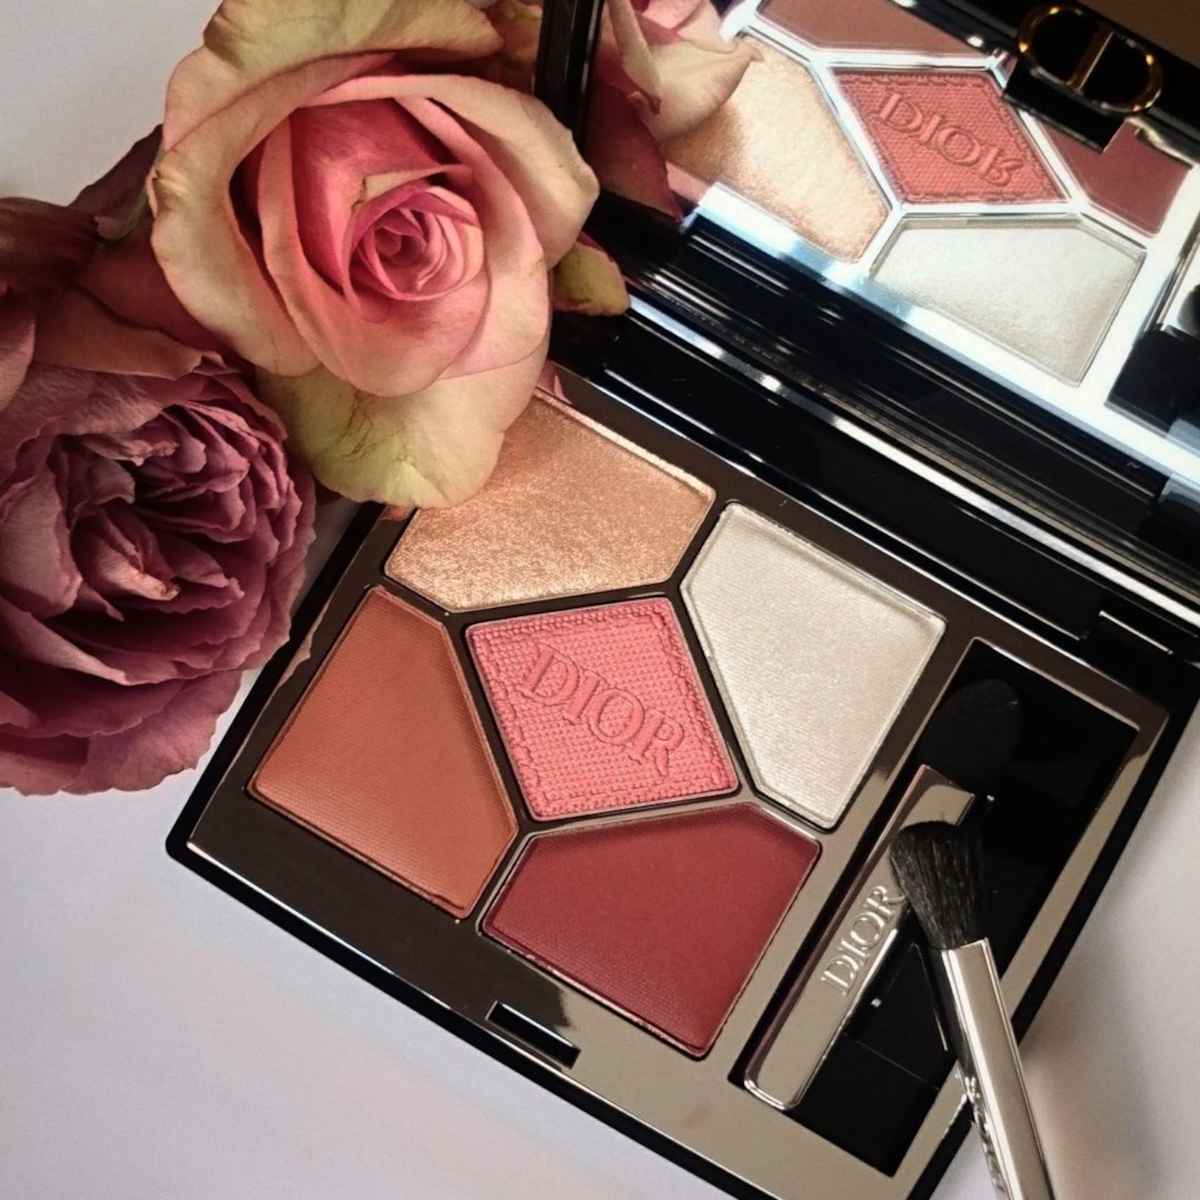 Collezione trucco Miss Dior Blooming Boudoir